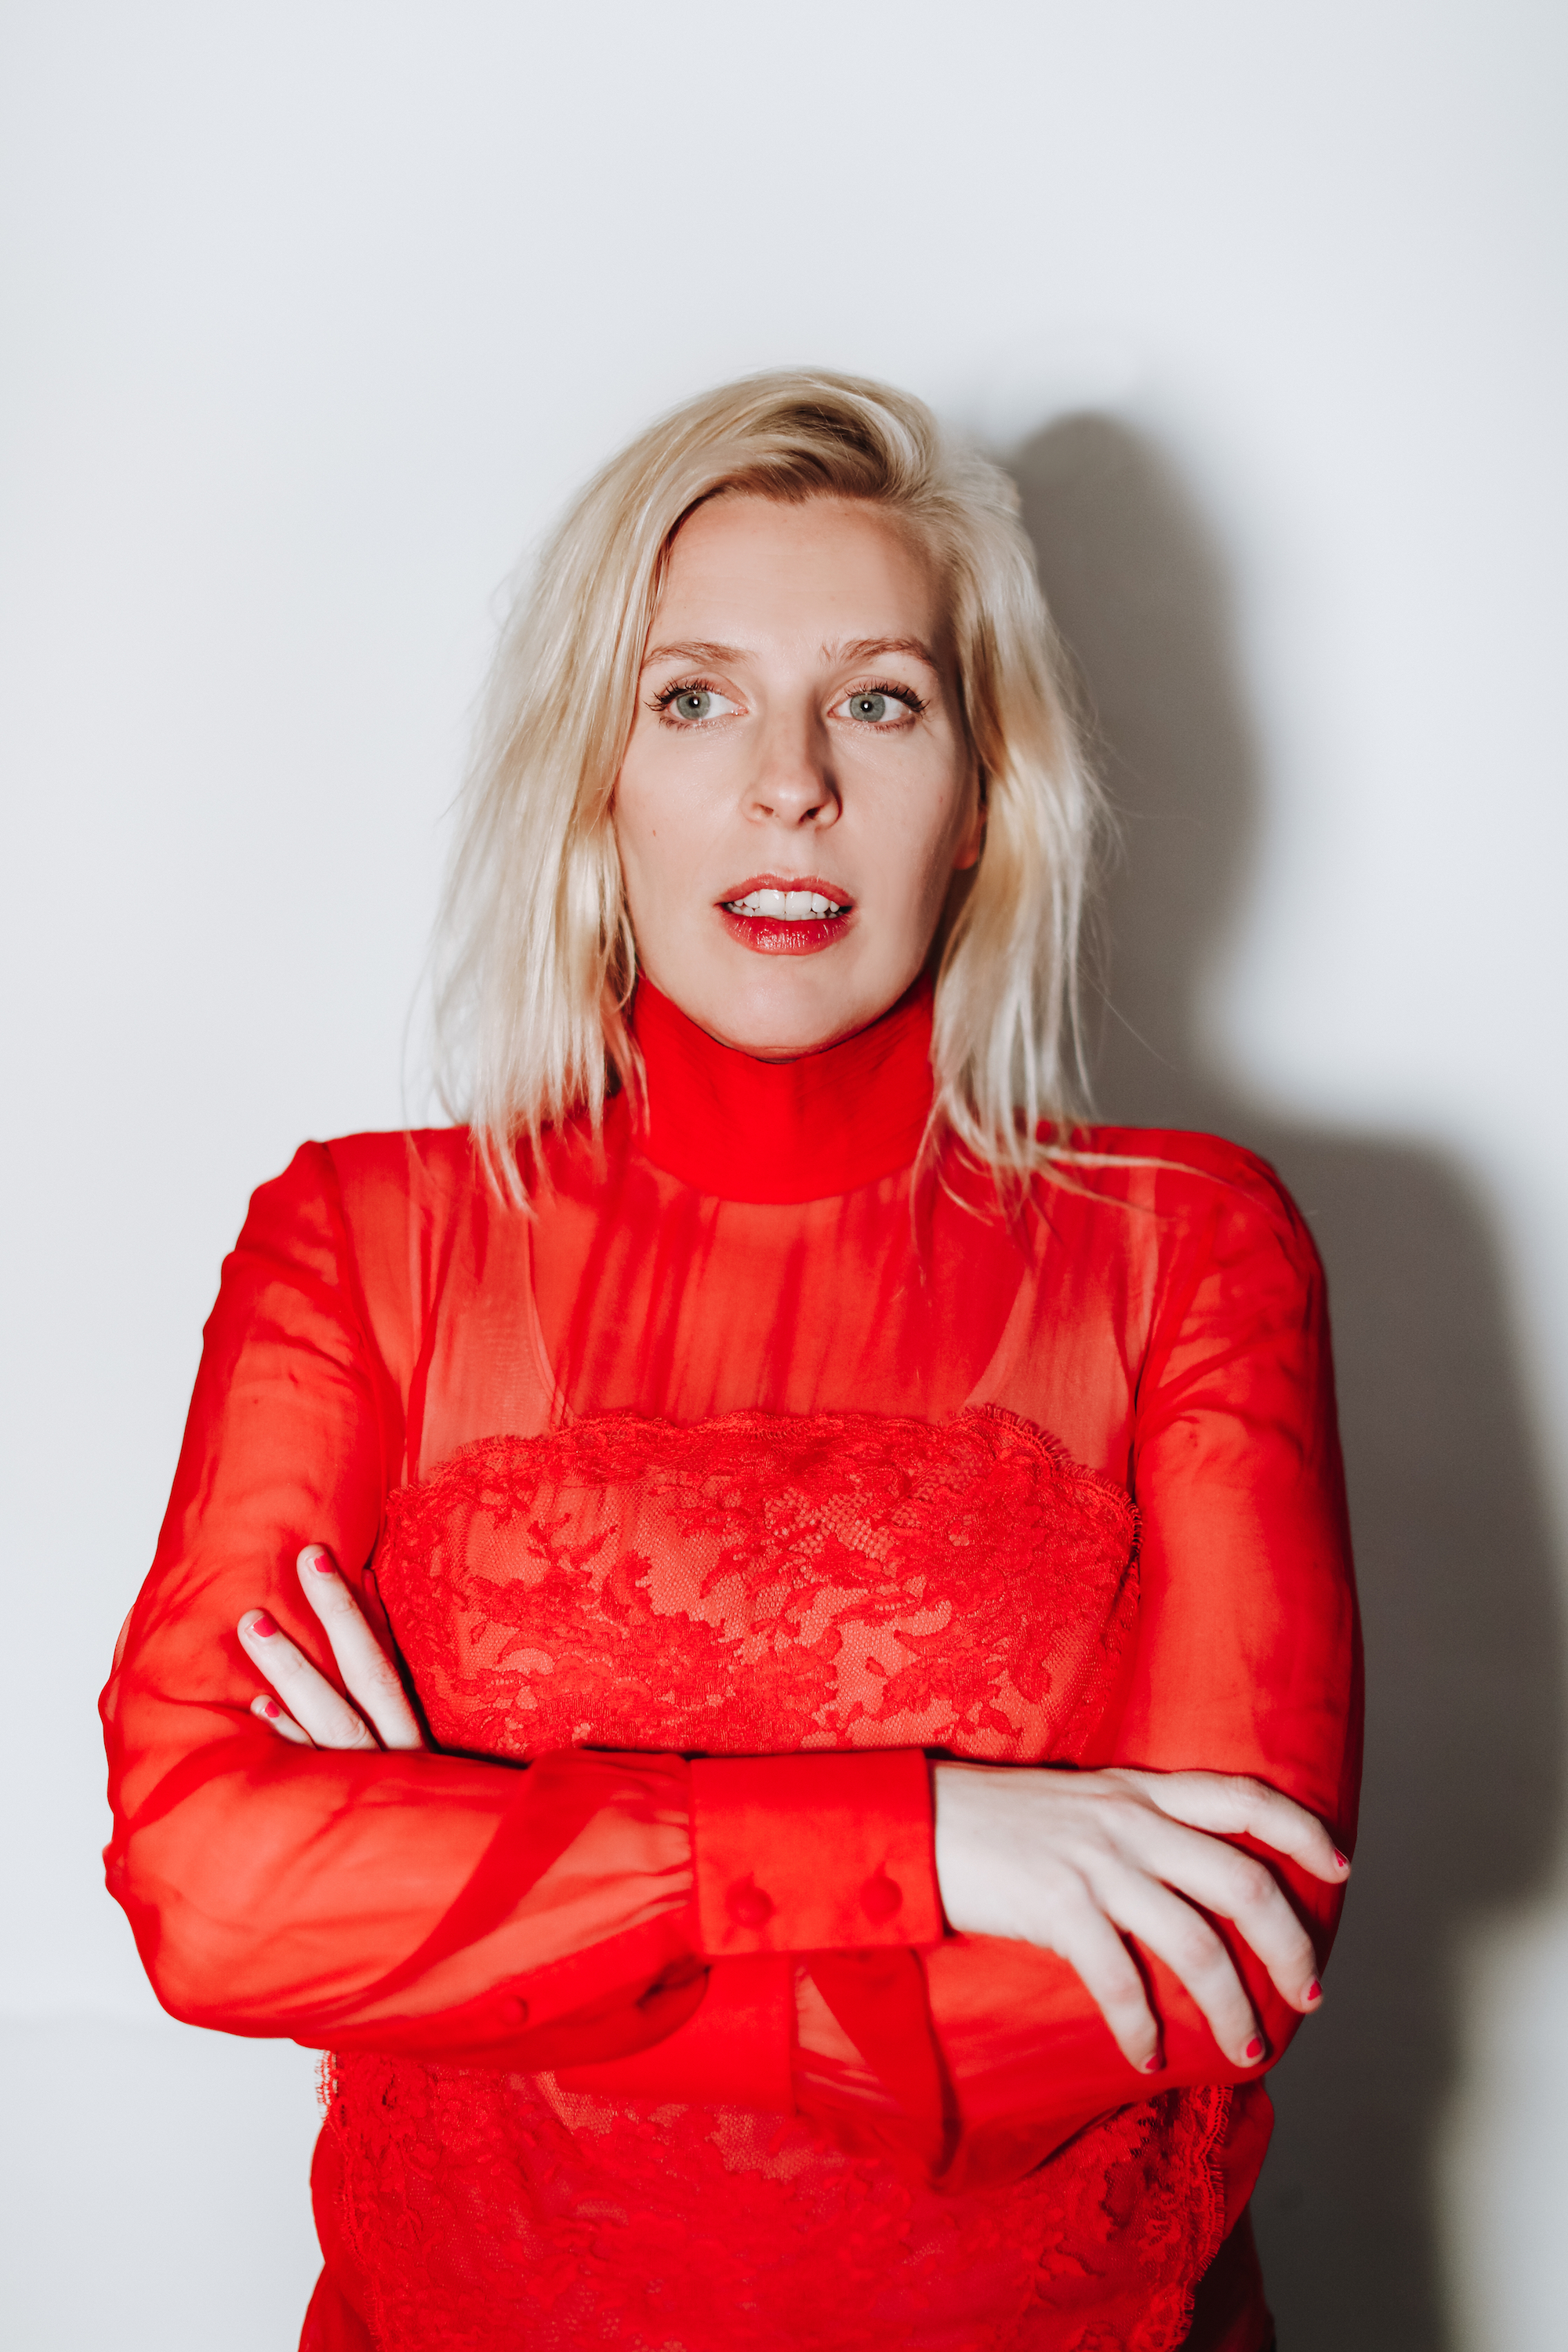 Sara Pascoe Interview discussing her new show success story